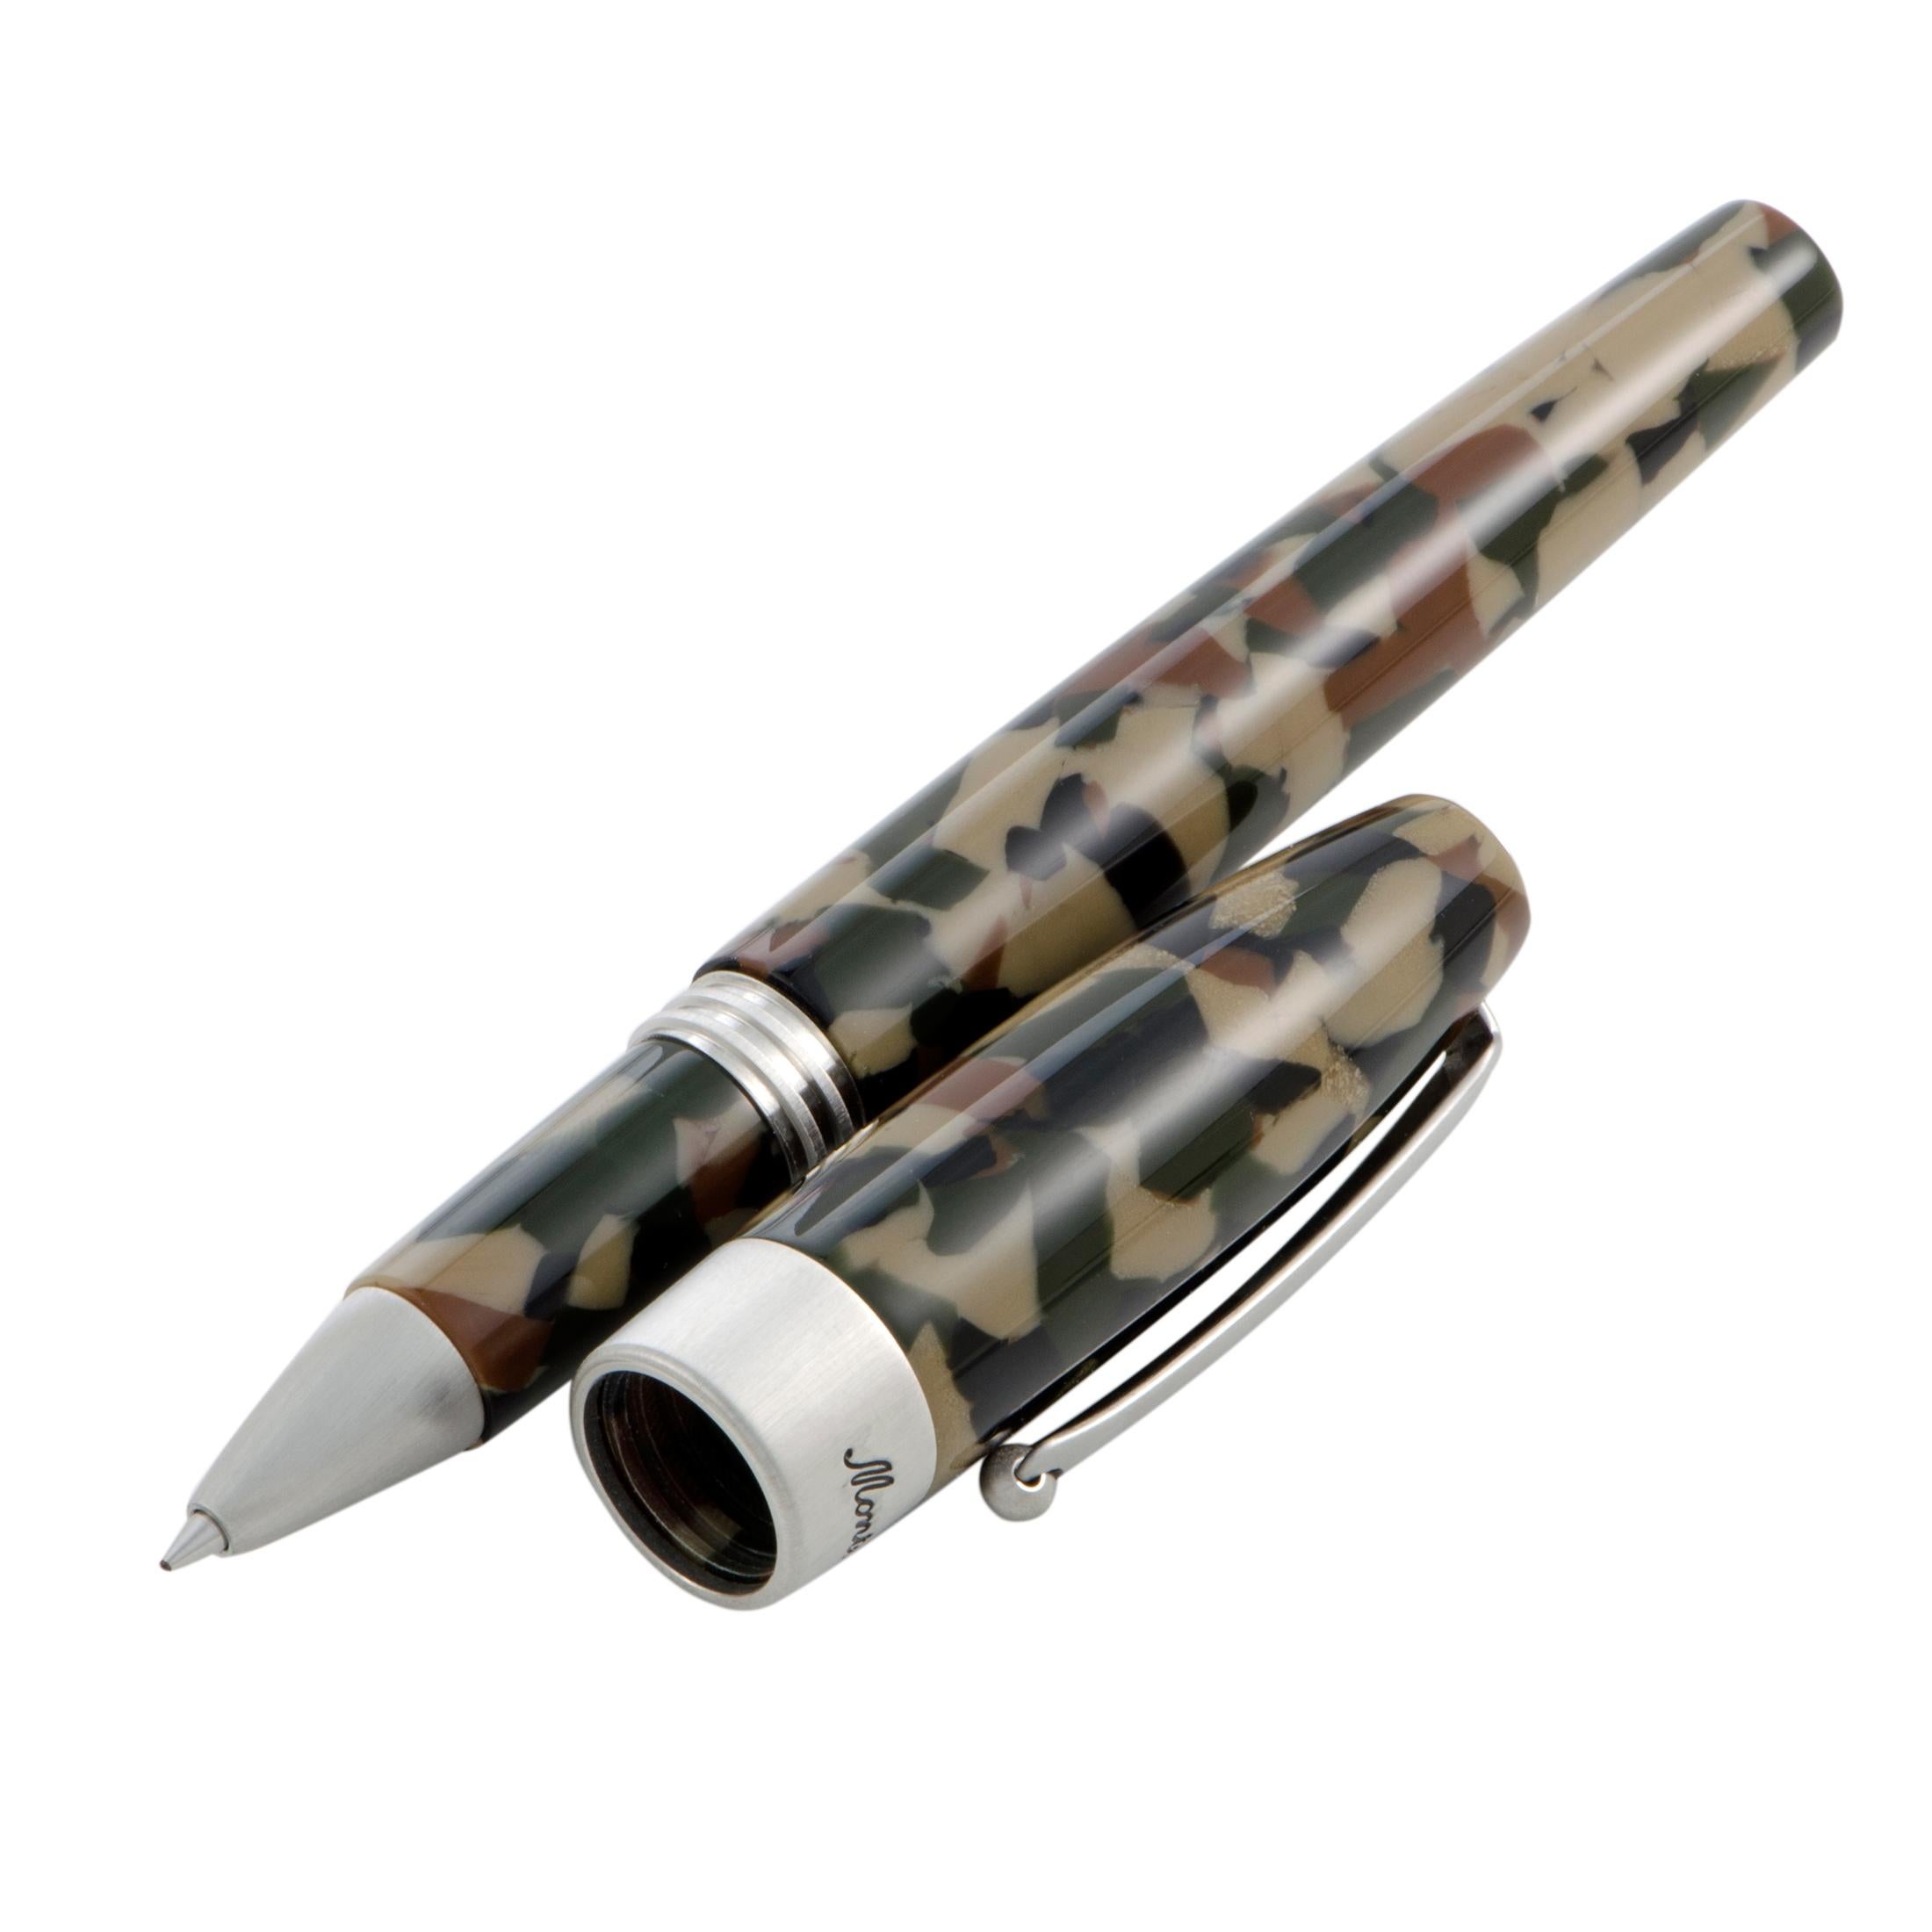 An exceptional fusion of superb technical quality and intriguing design, this exquisite rollerball pen that is created by Montegrappa is an item of both aesthetic and practical value. The pen is presented in an interesting tin box that resembles